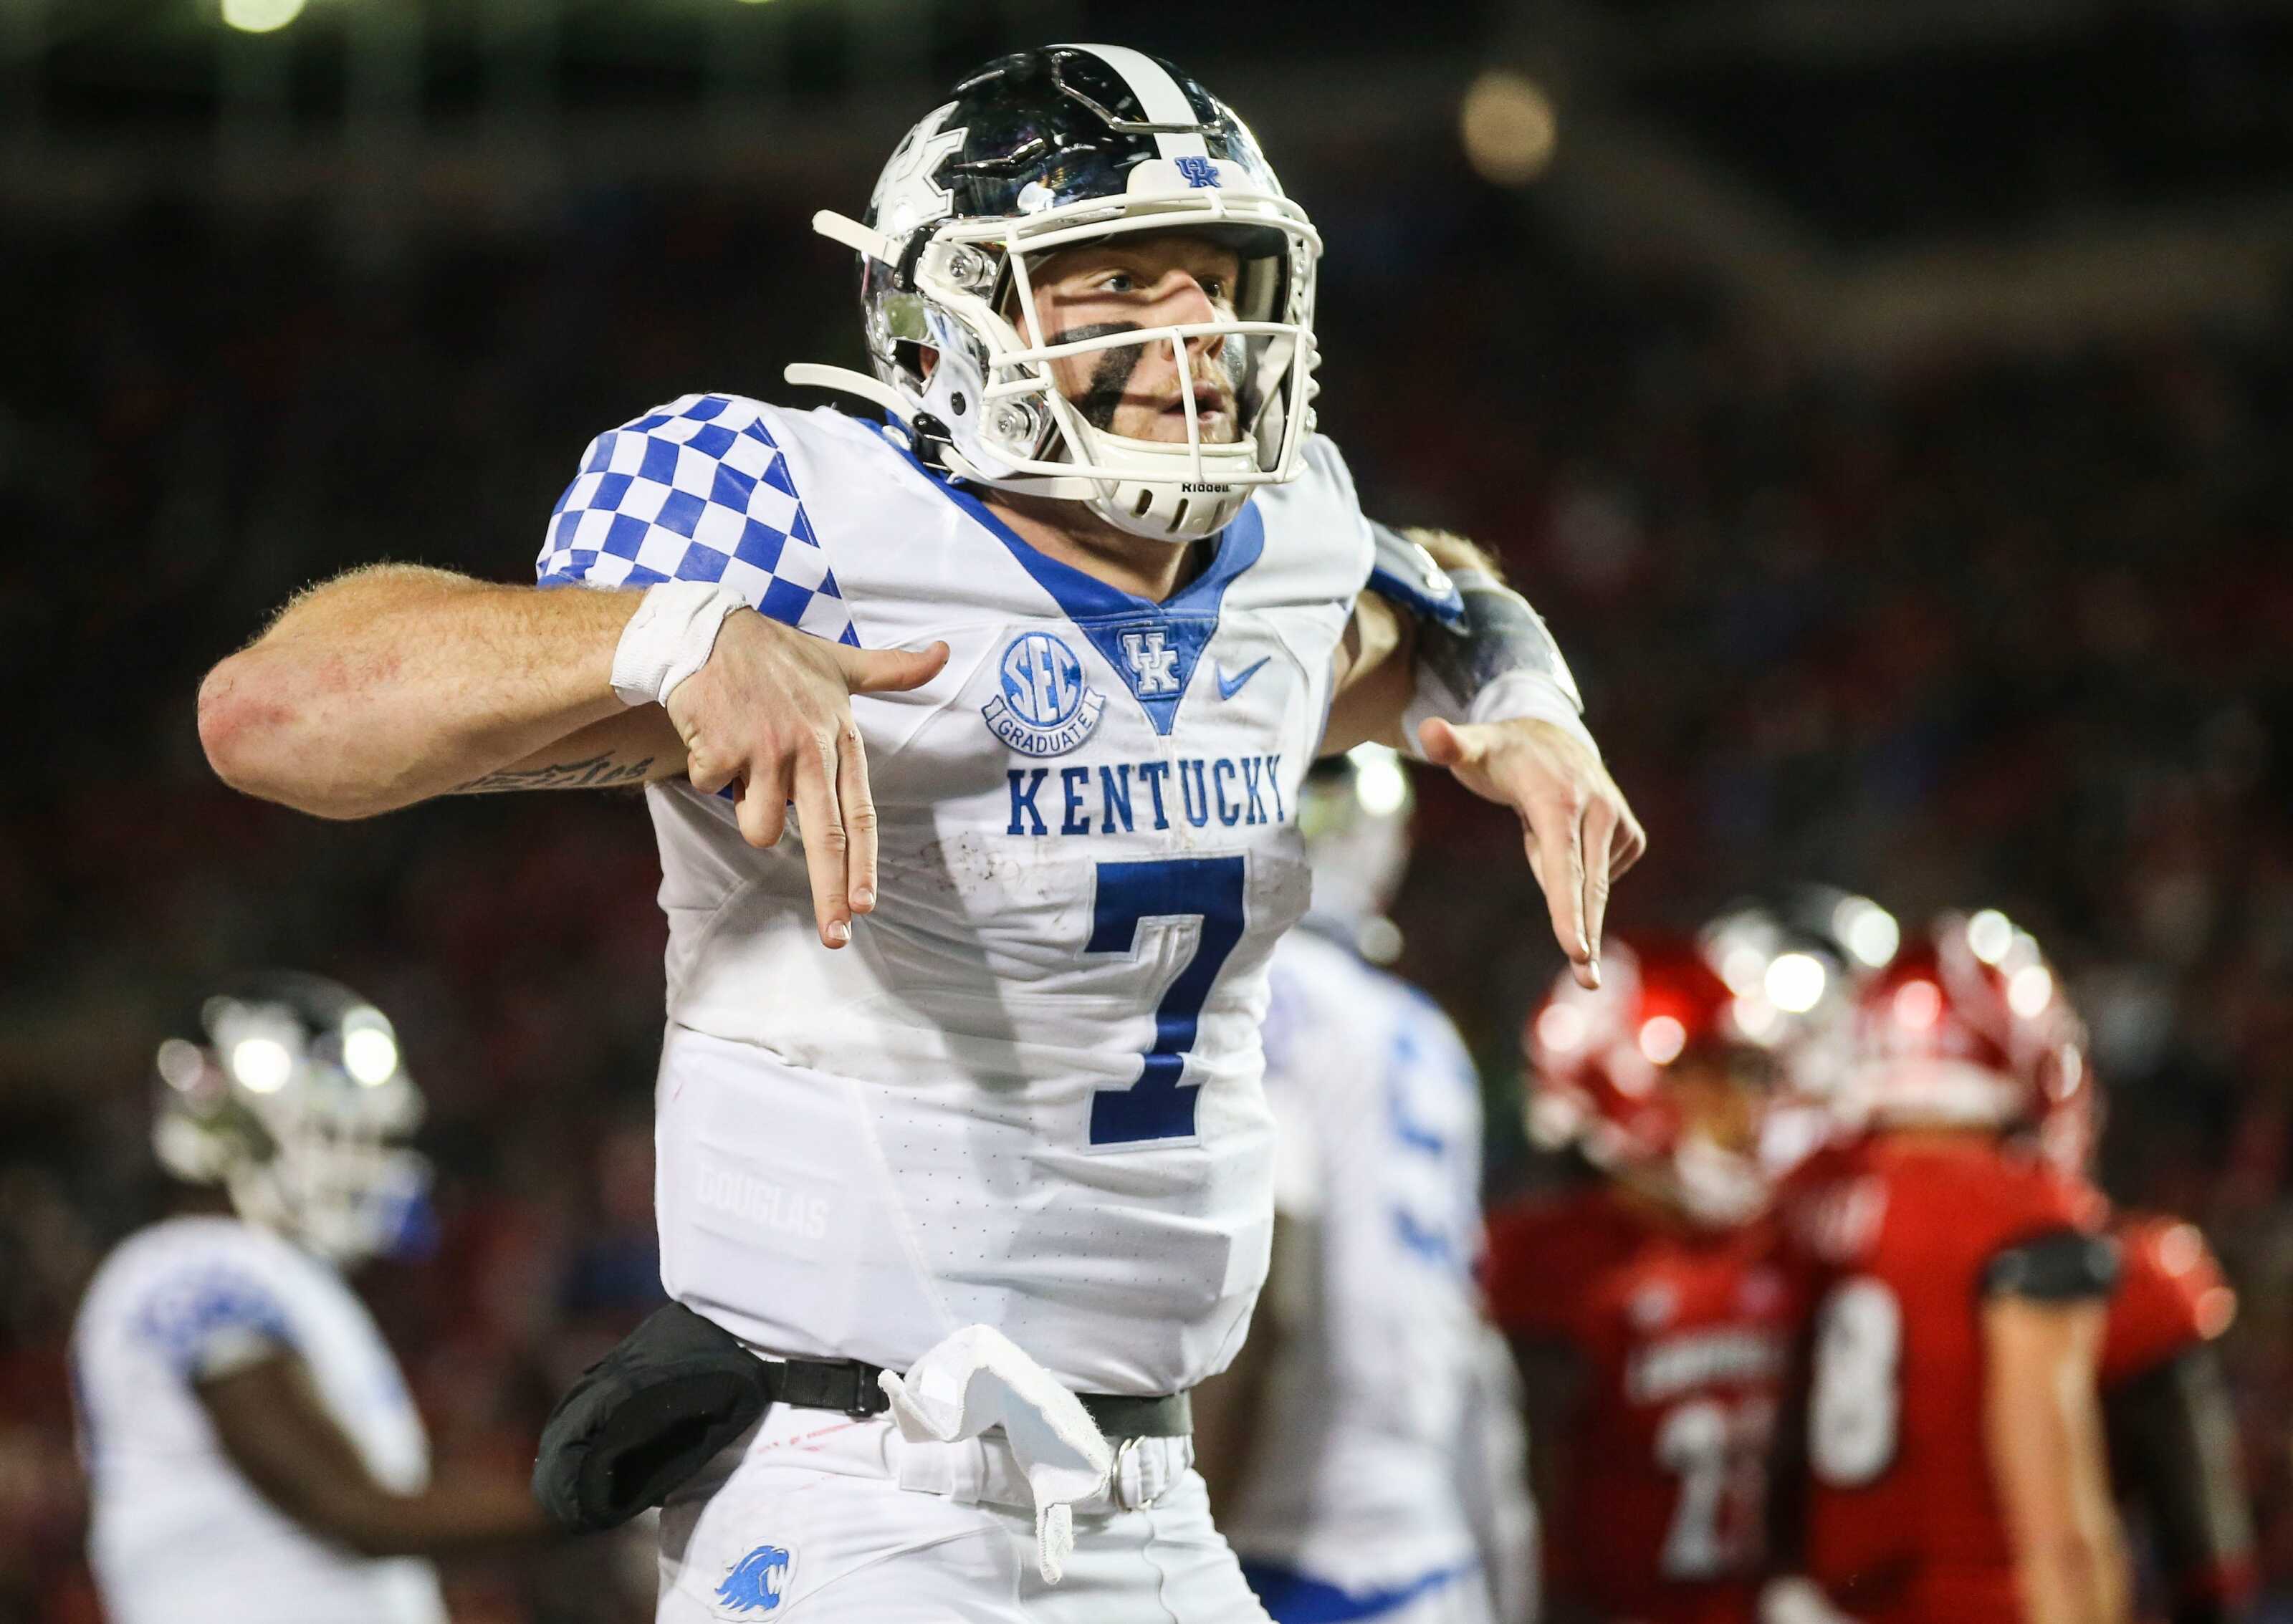 Ky vs Louisville football: Game time, channel, odds, rosters